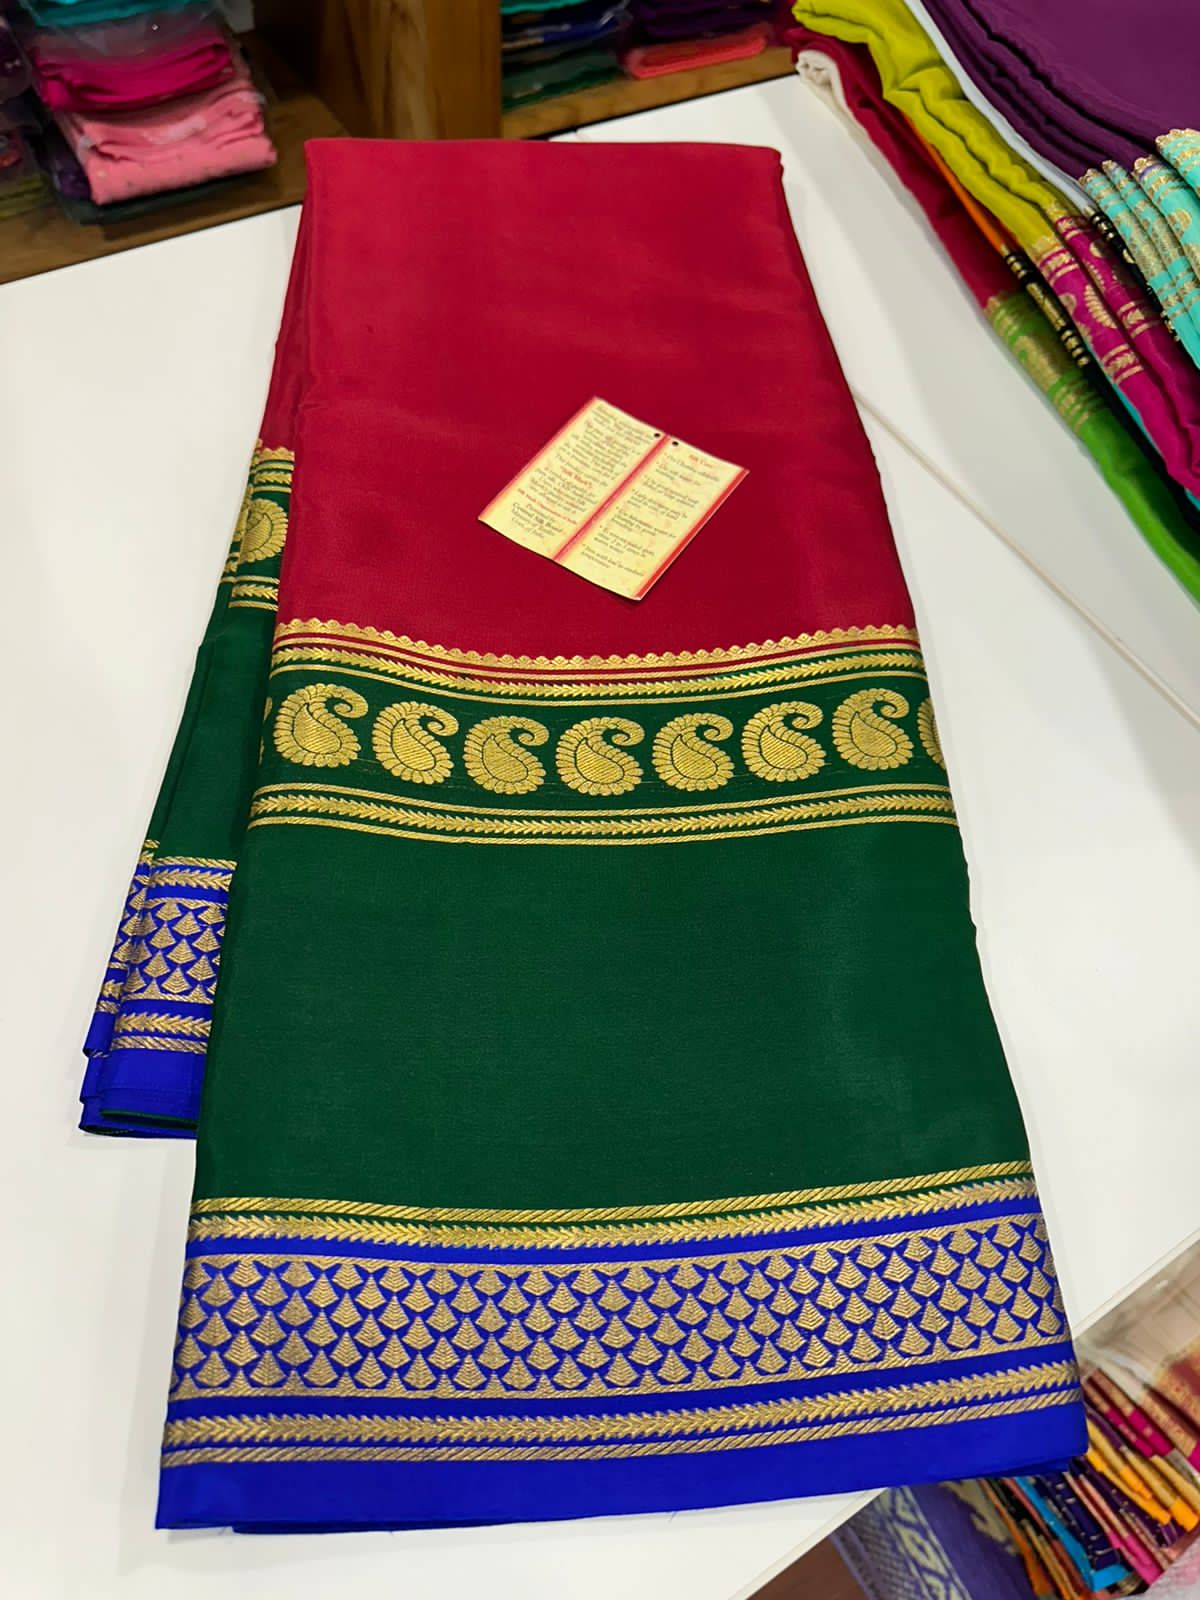 Pure Mysore silk sarees with 120 grm thickness along with 3 D pattern which comes With beautiful color combination